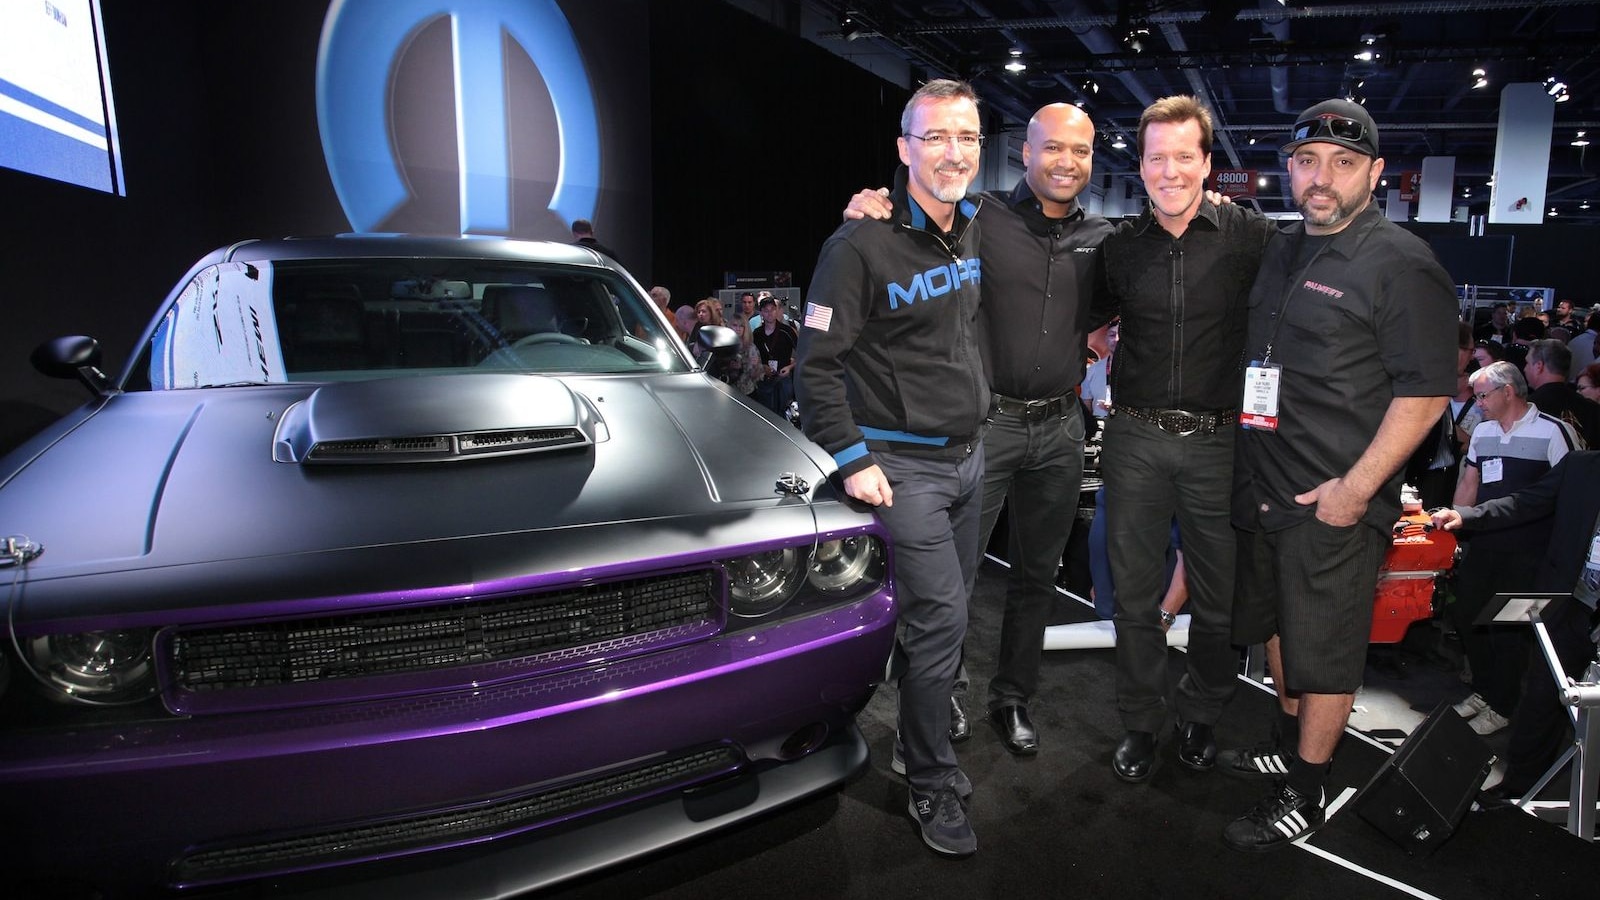 The unveiling of the Project UltraViolet Challenger at SEMA